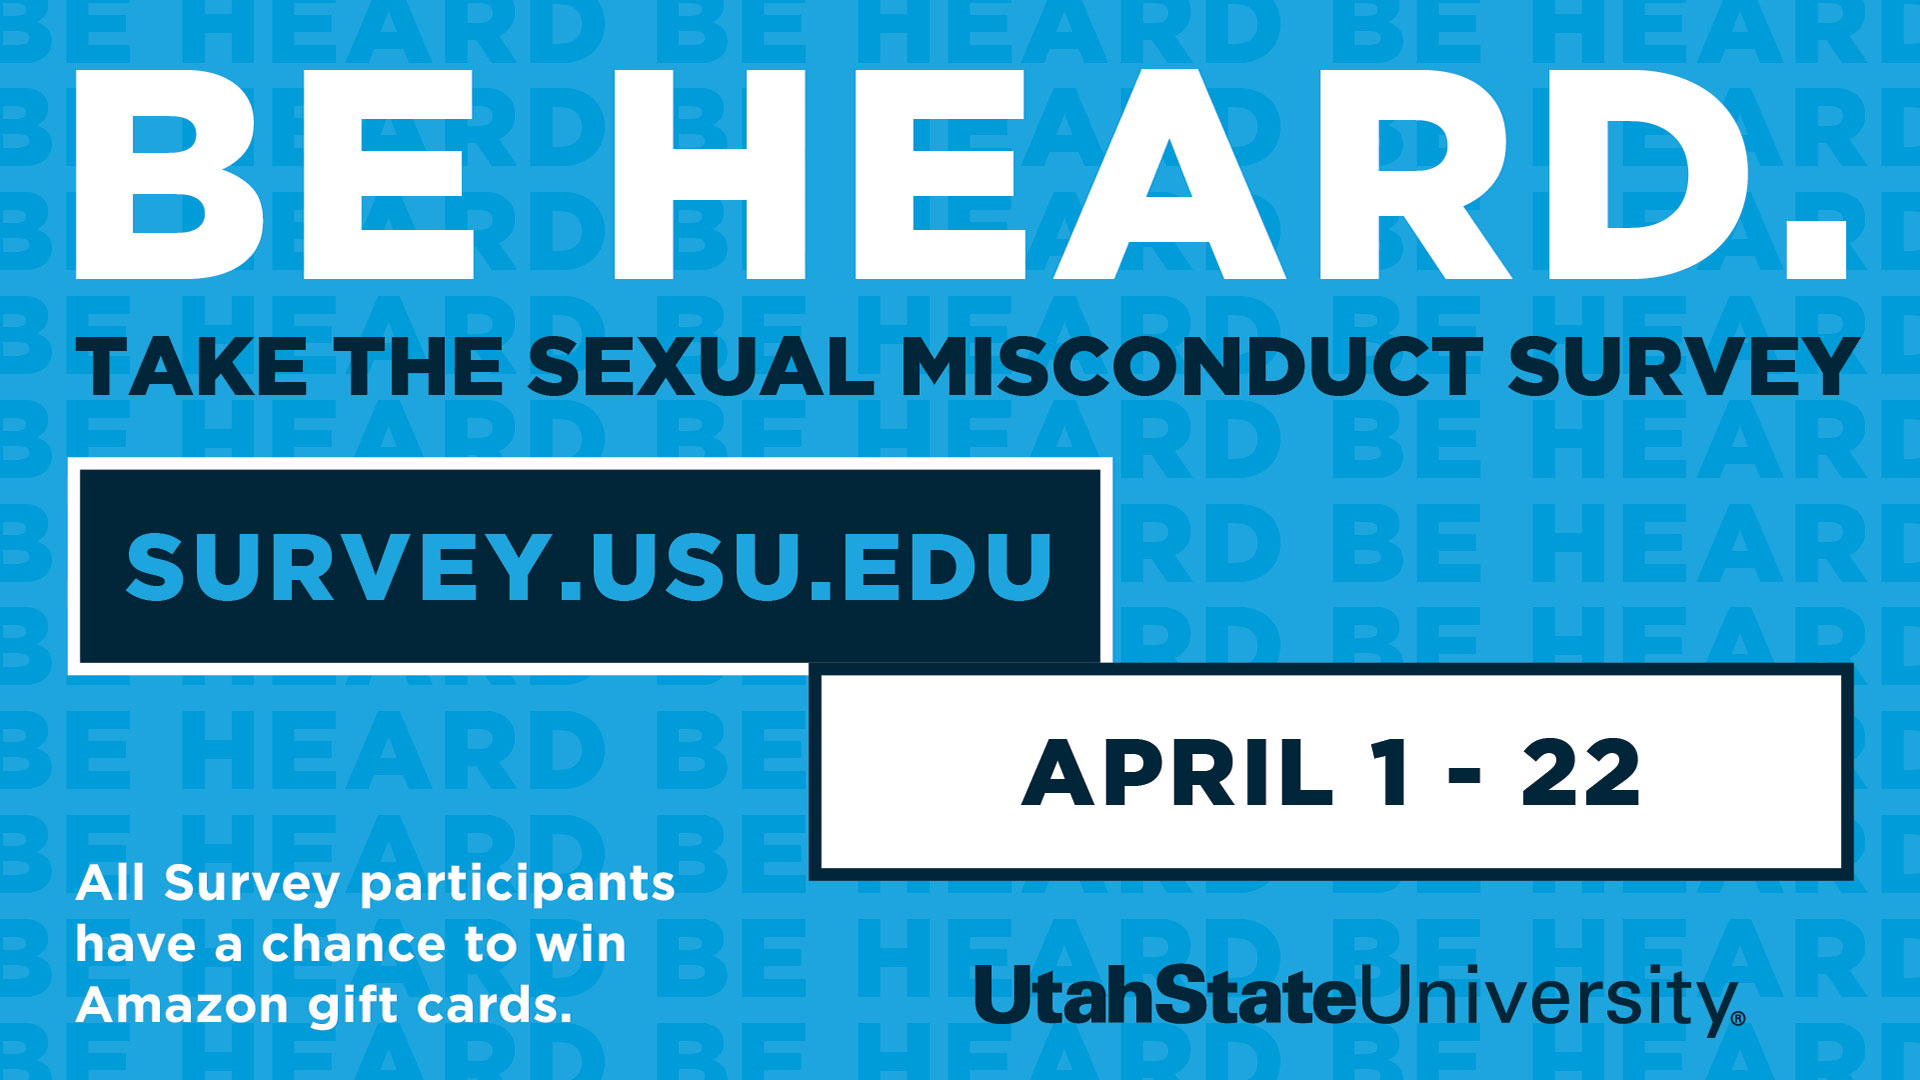 Be heard. Take the sexual misconduct survey. survey.usu.edu, April 1-22. All survey participants have a chance to win Amazon gift cards. Utah State University.